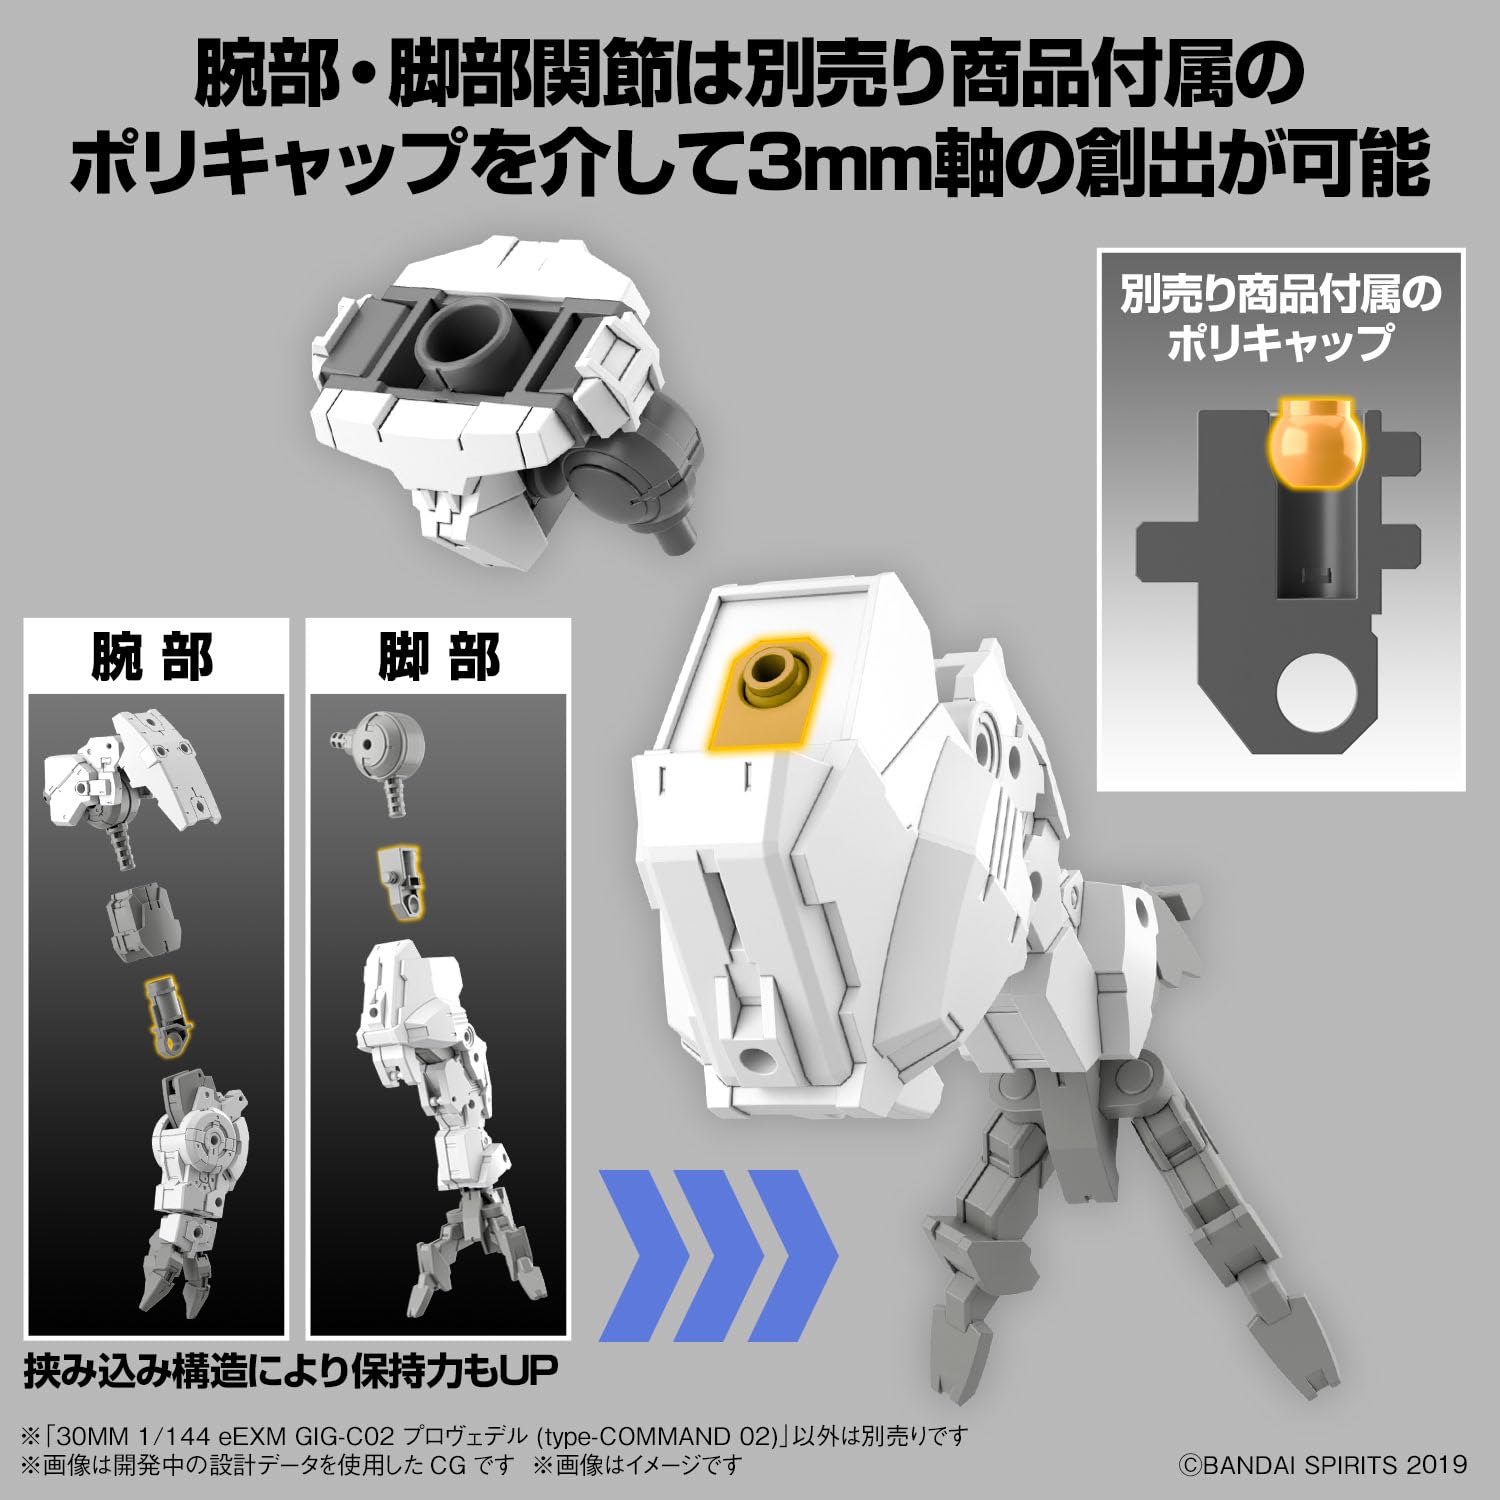 30MM eEXM GIG-C02 Provedel (type-COMMAND 02) 1/144 scale color-coded plastic model - BanzaiHobby